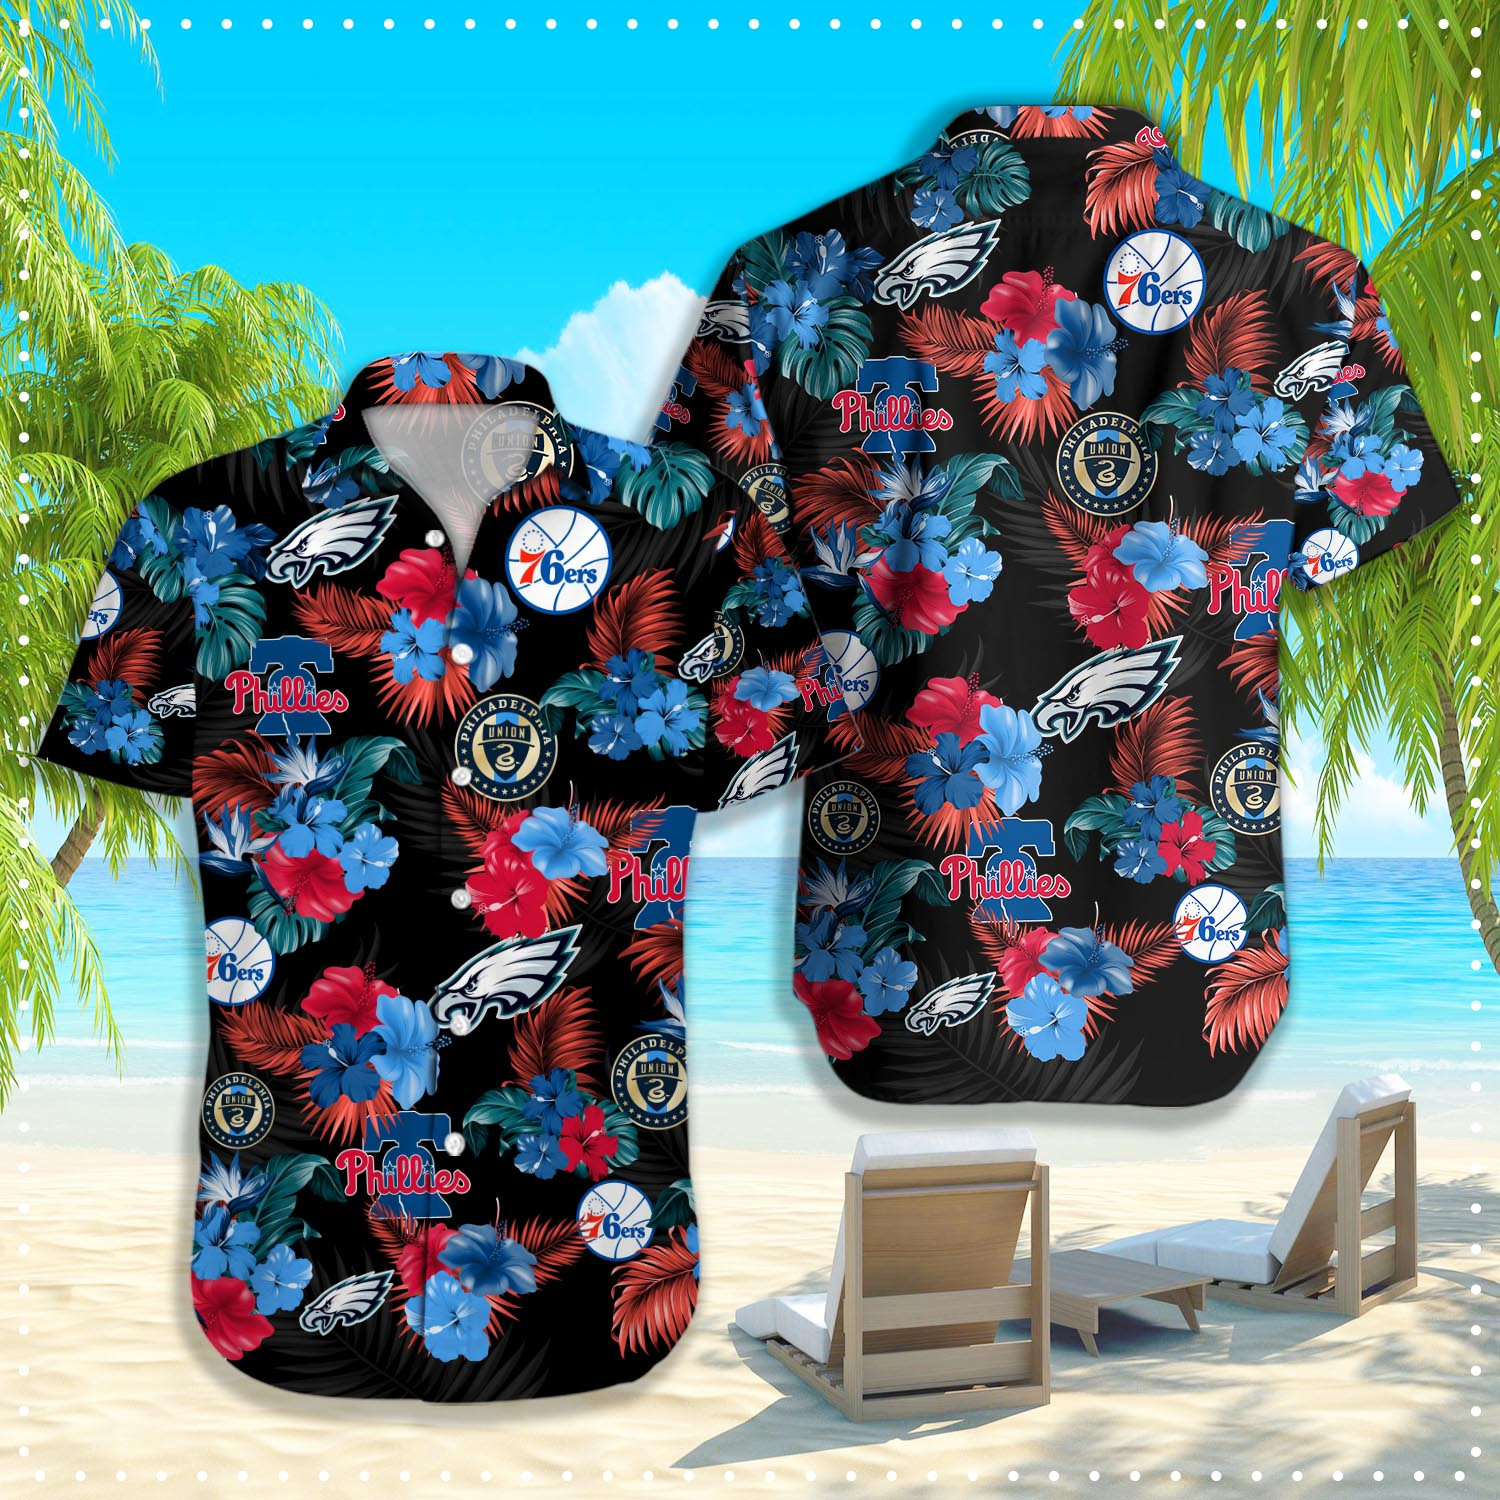 If you are looking for a one-of-a-kind shirt, check it out 77